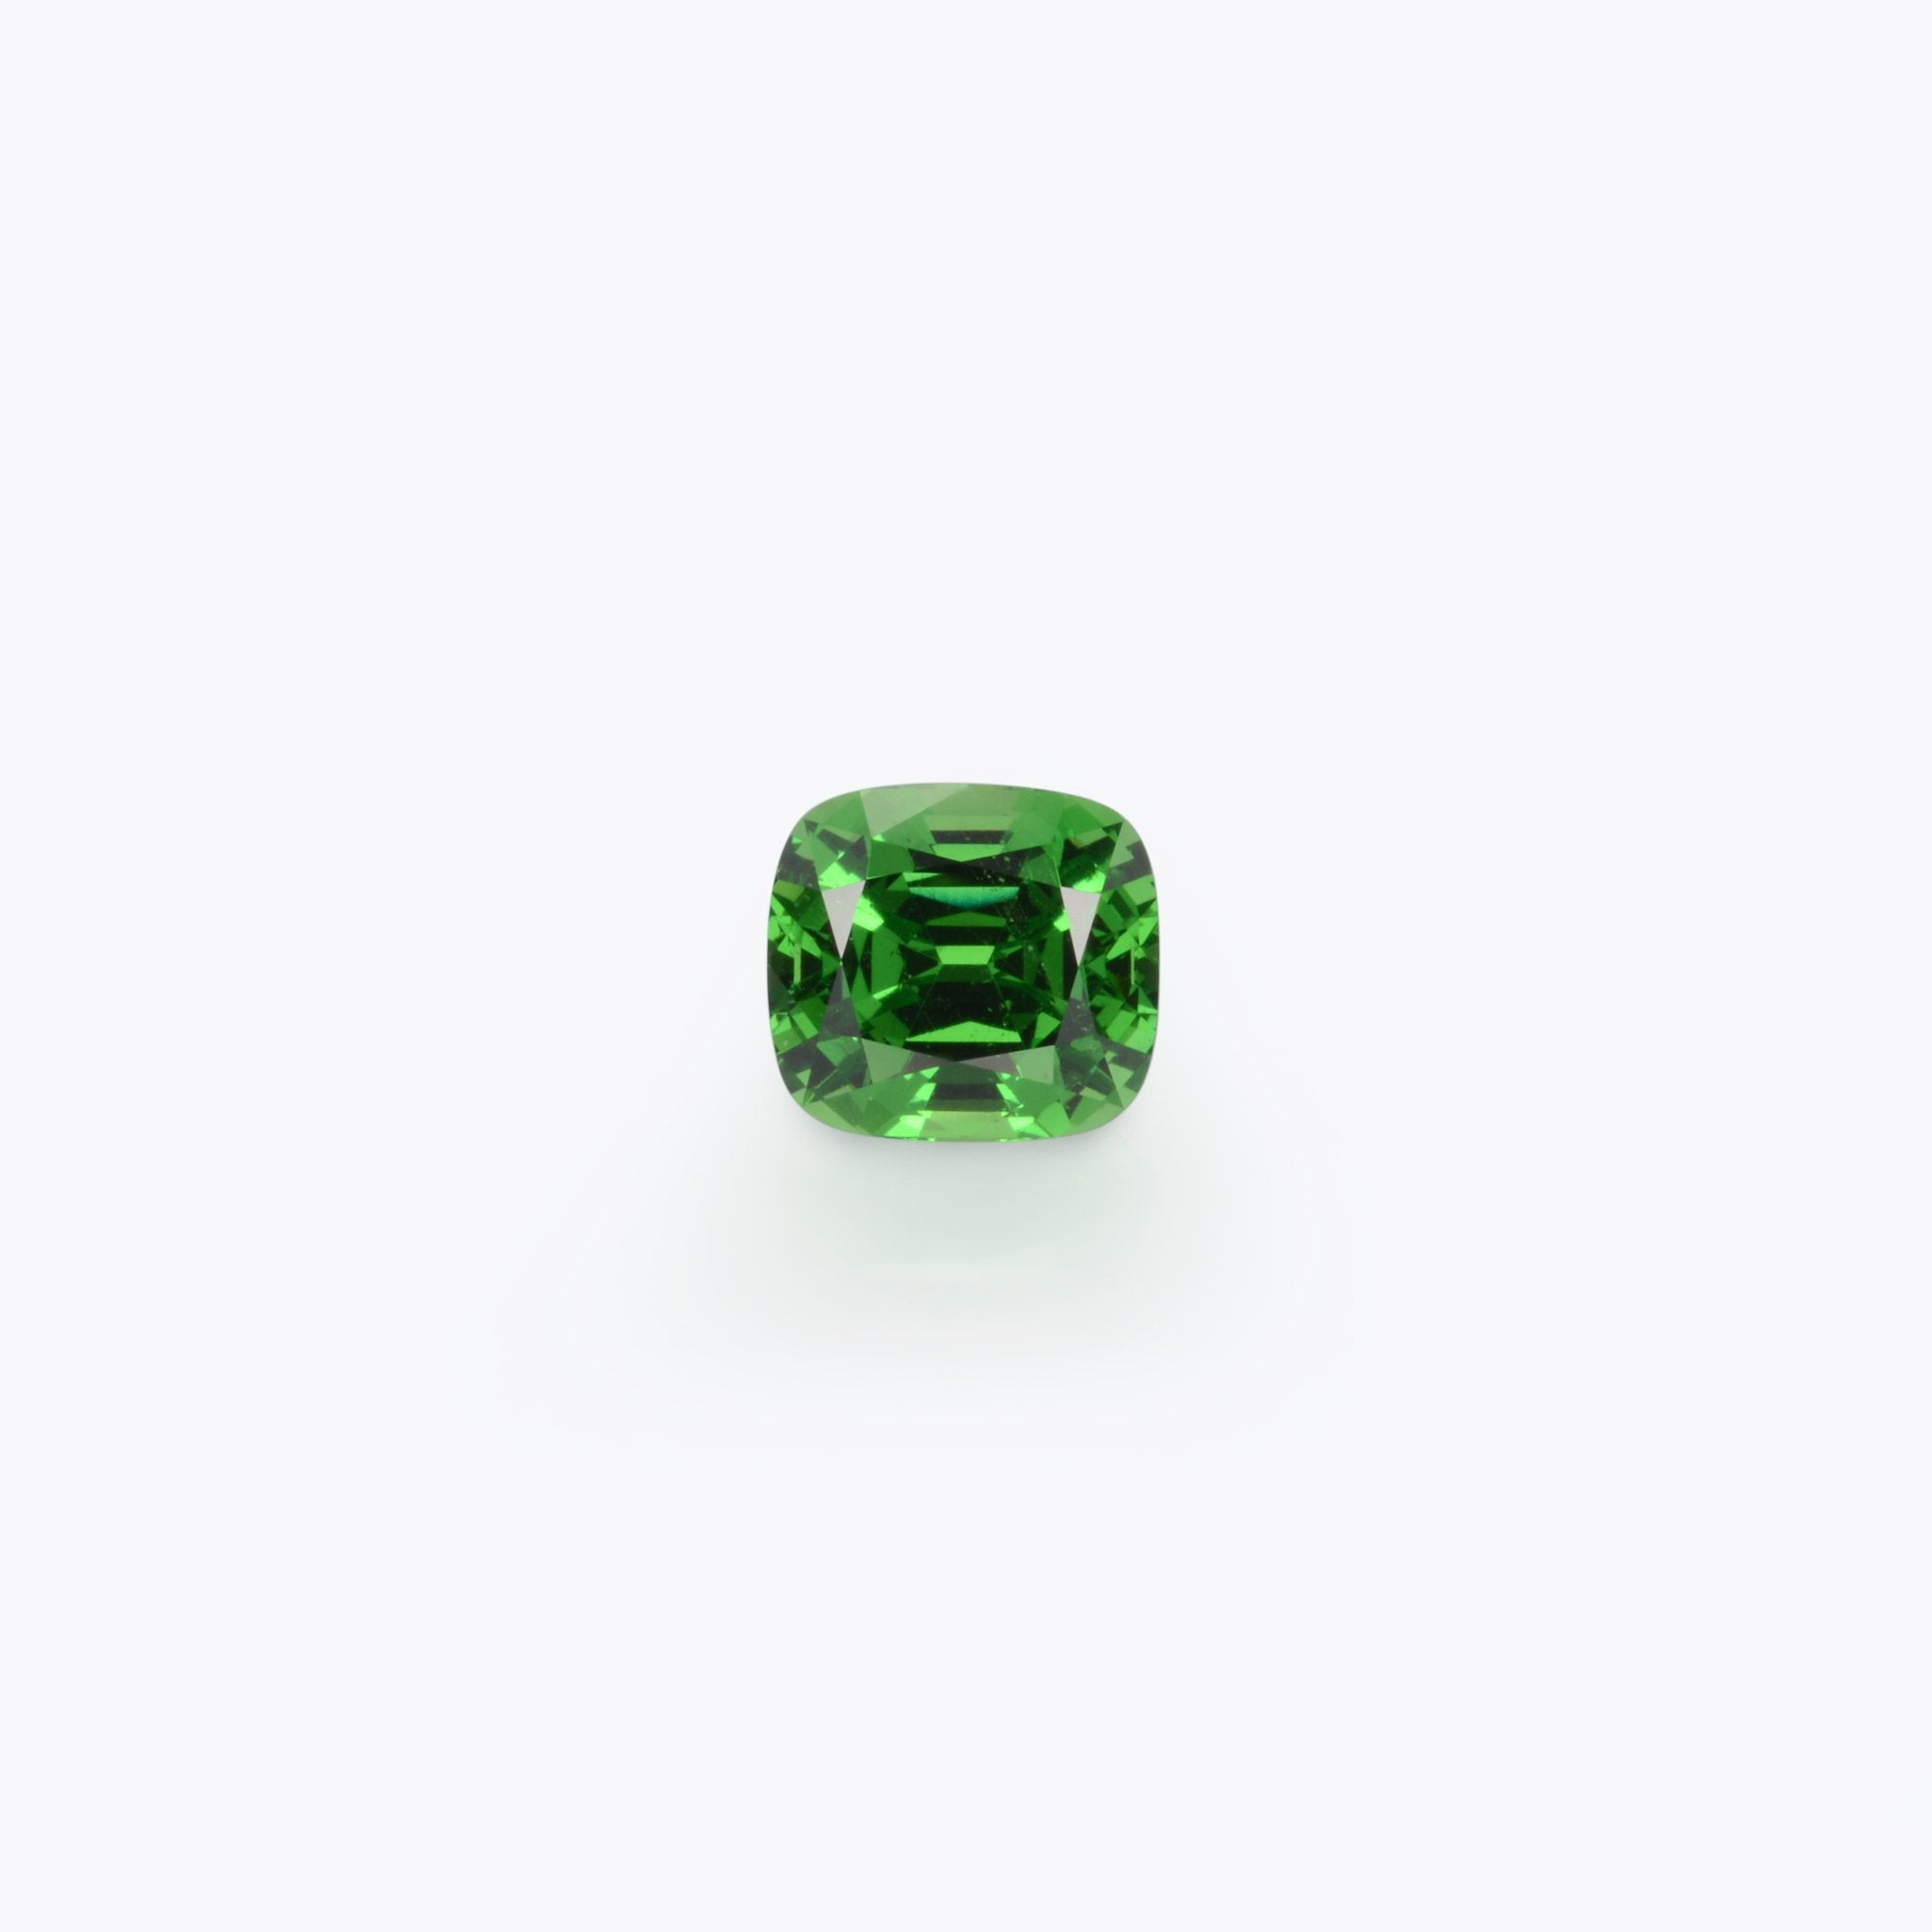 Alluring 3.18 carat Tsavorite cushion cut gem, offered loose to a very special lady or gentleman.
Dimensions: 8.20 x 7.50 x 6.10 mm.
Returns are accepted and paid by us within 7 days of delivery.
We offer supreme custom jewelry work upon request.